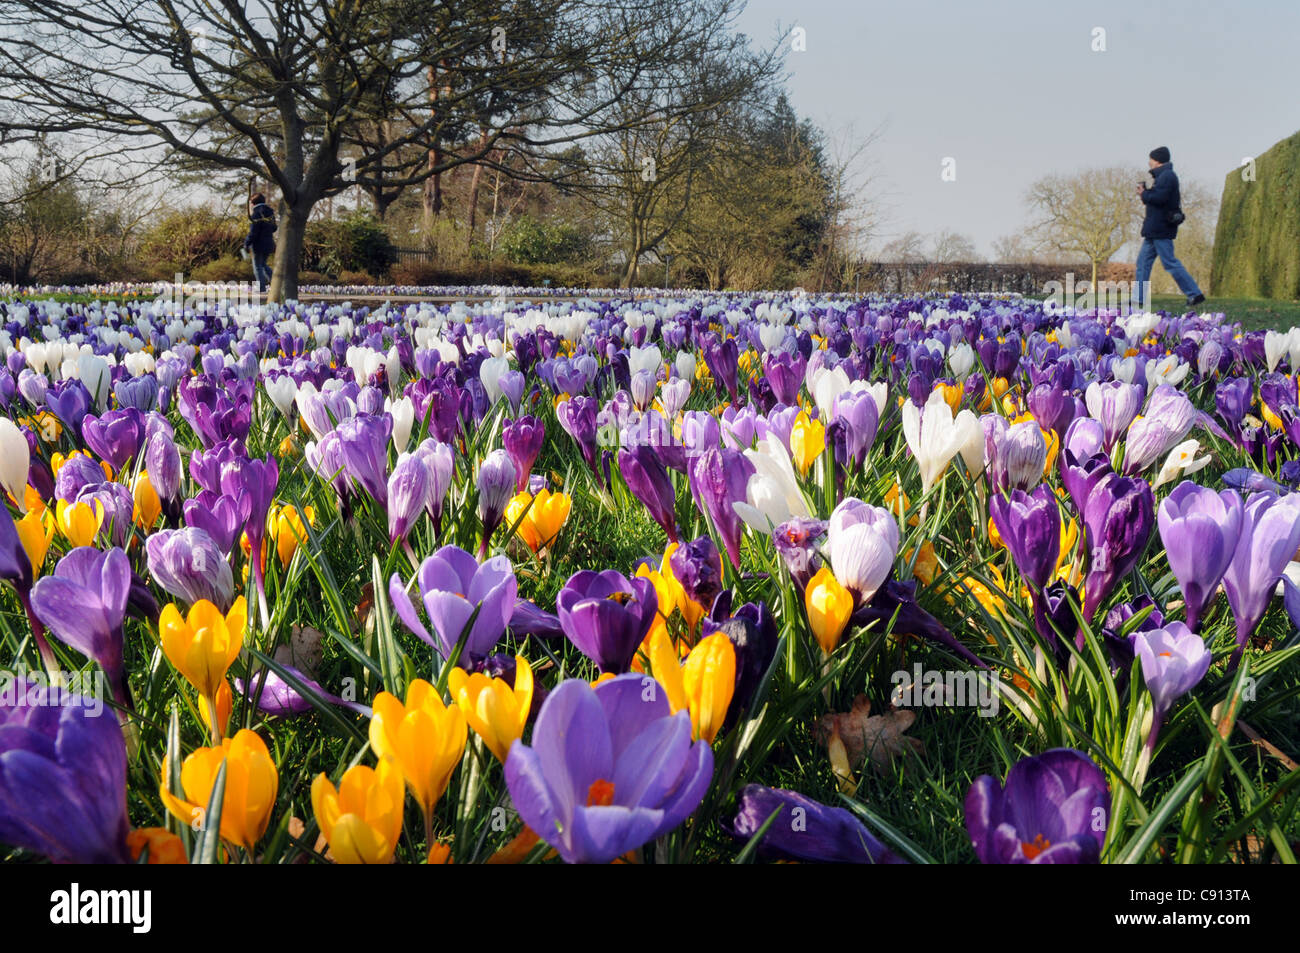 VISITORS TO THE ROYAL HORTICULTURAL SOCETY GARDEN AT WISLEY IN SURREY ARE GREETED BY A MAGNIFICENT CARPET OF CROCUSES THAT SHIMM Stock Photo